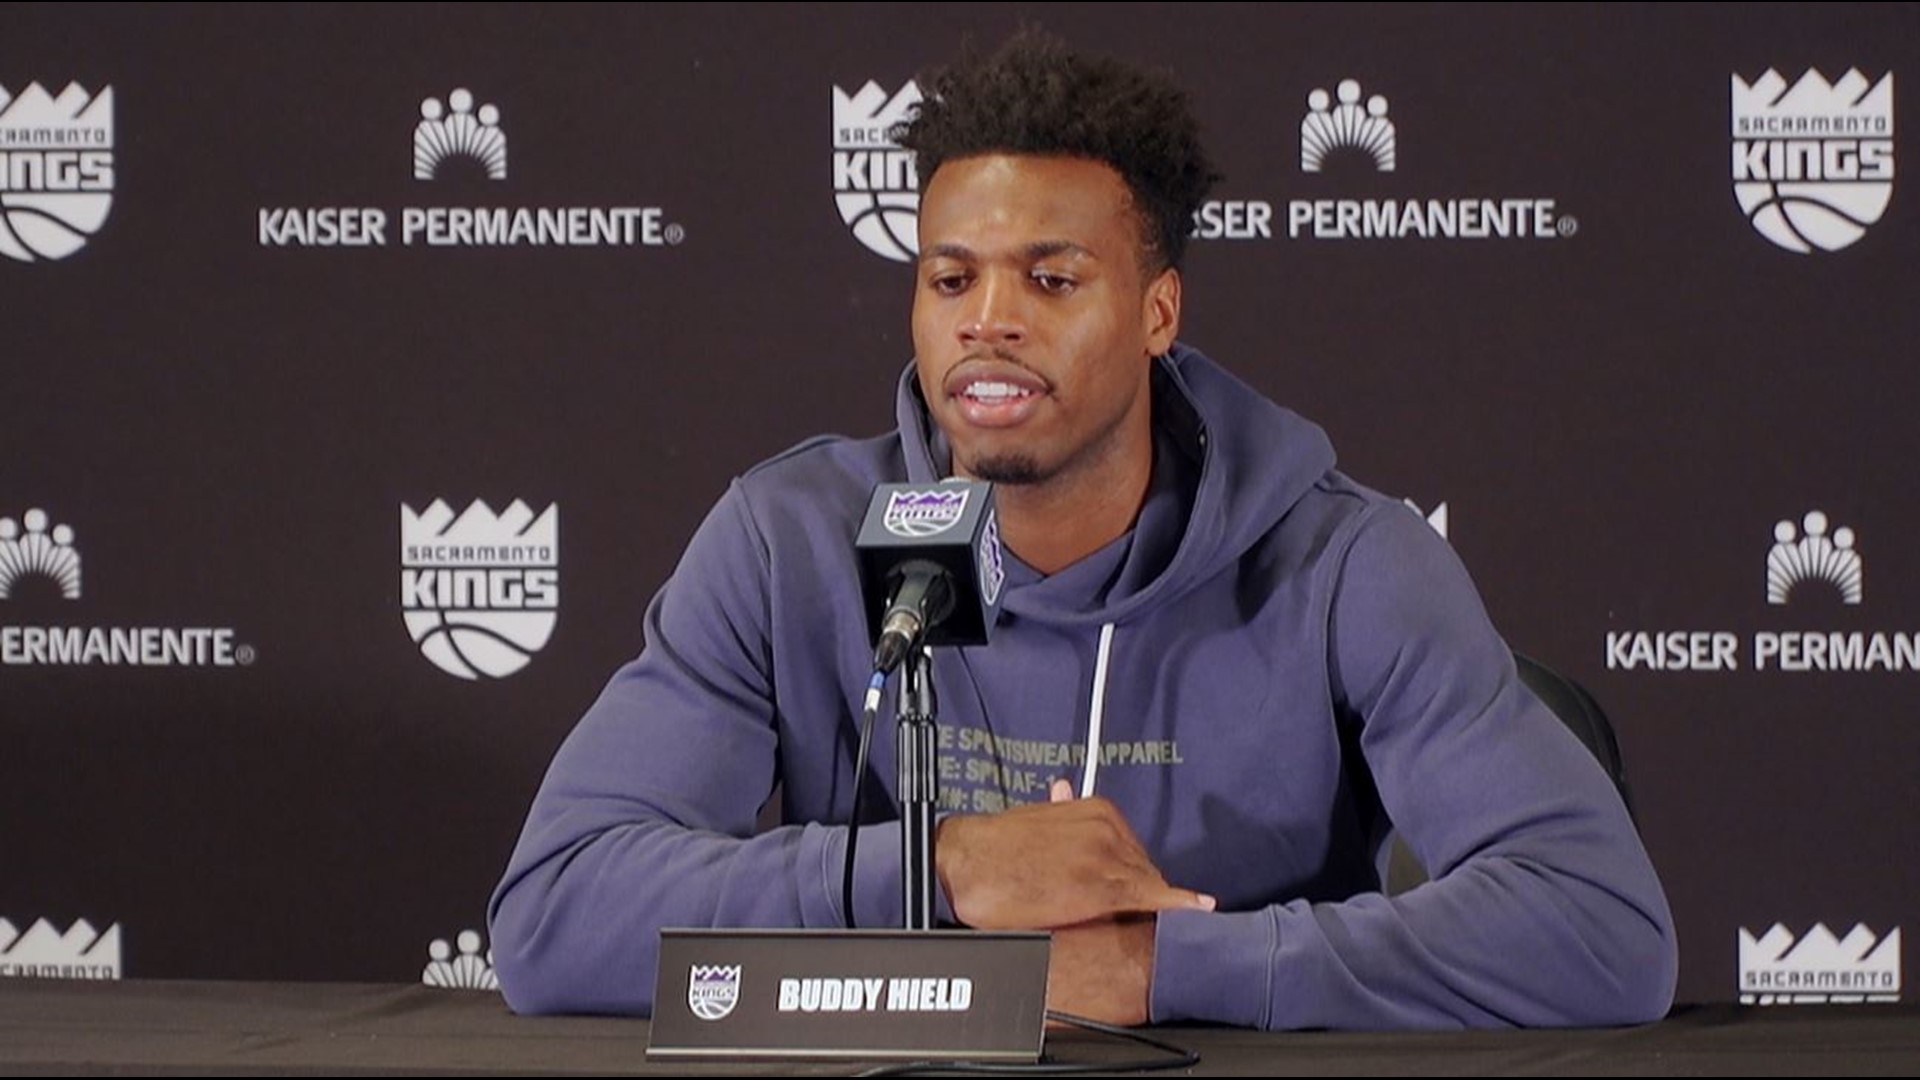 Sacramento Kings star and Bahamas native Buddy Hield donates $100,000 of his own money to help those in need after devastating Hurricane Dorian ripped through the islands of Grand Bahama and Acabo.